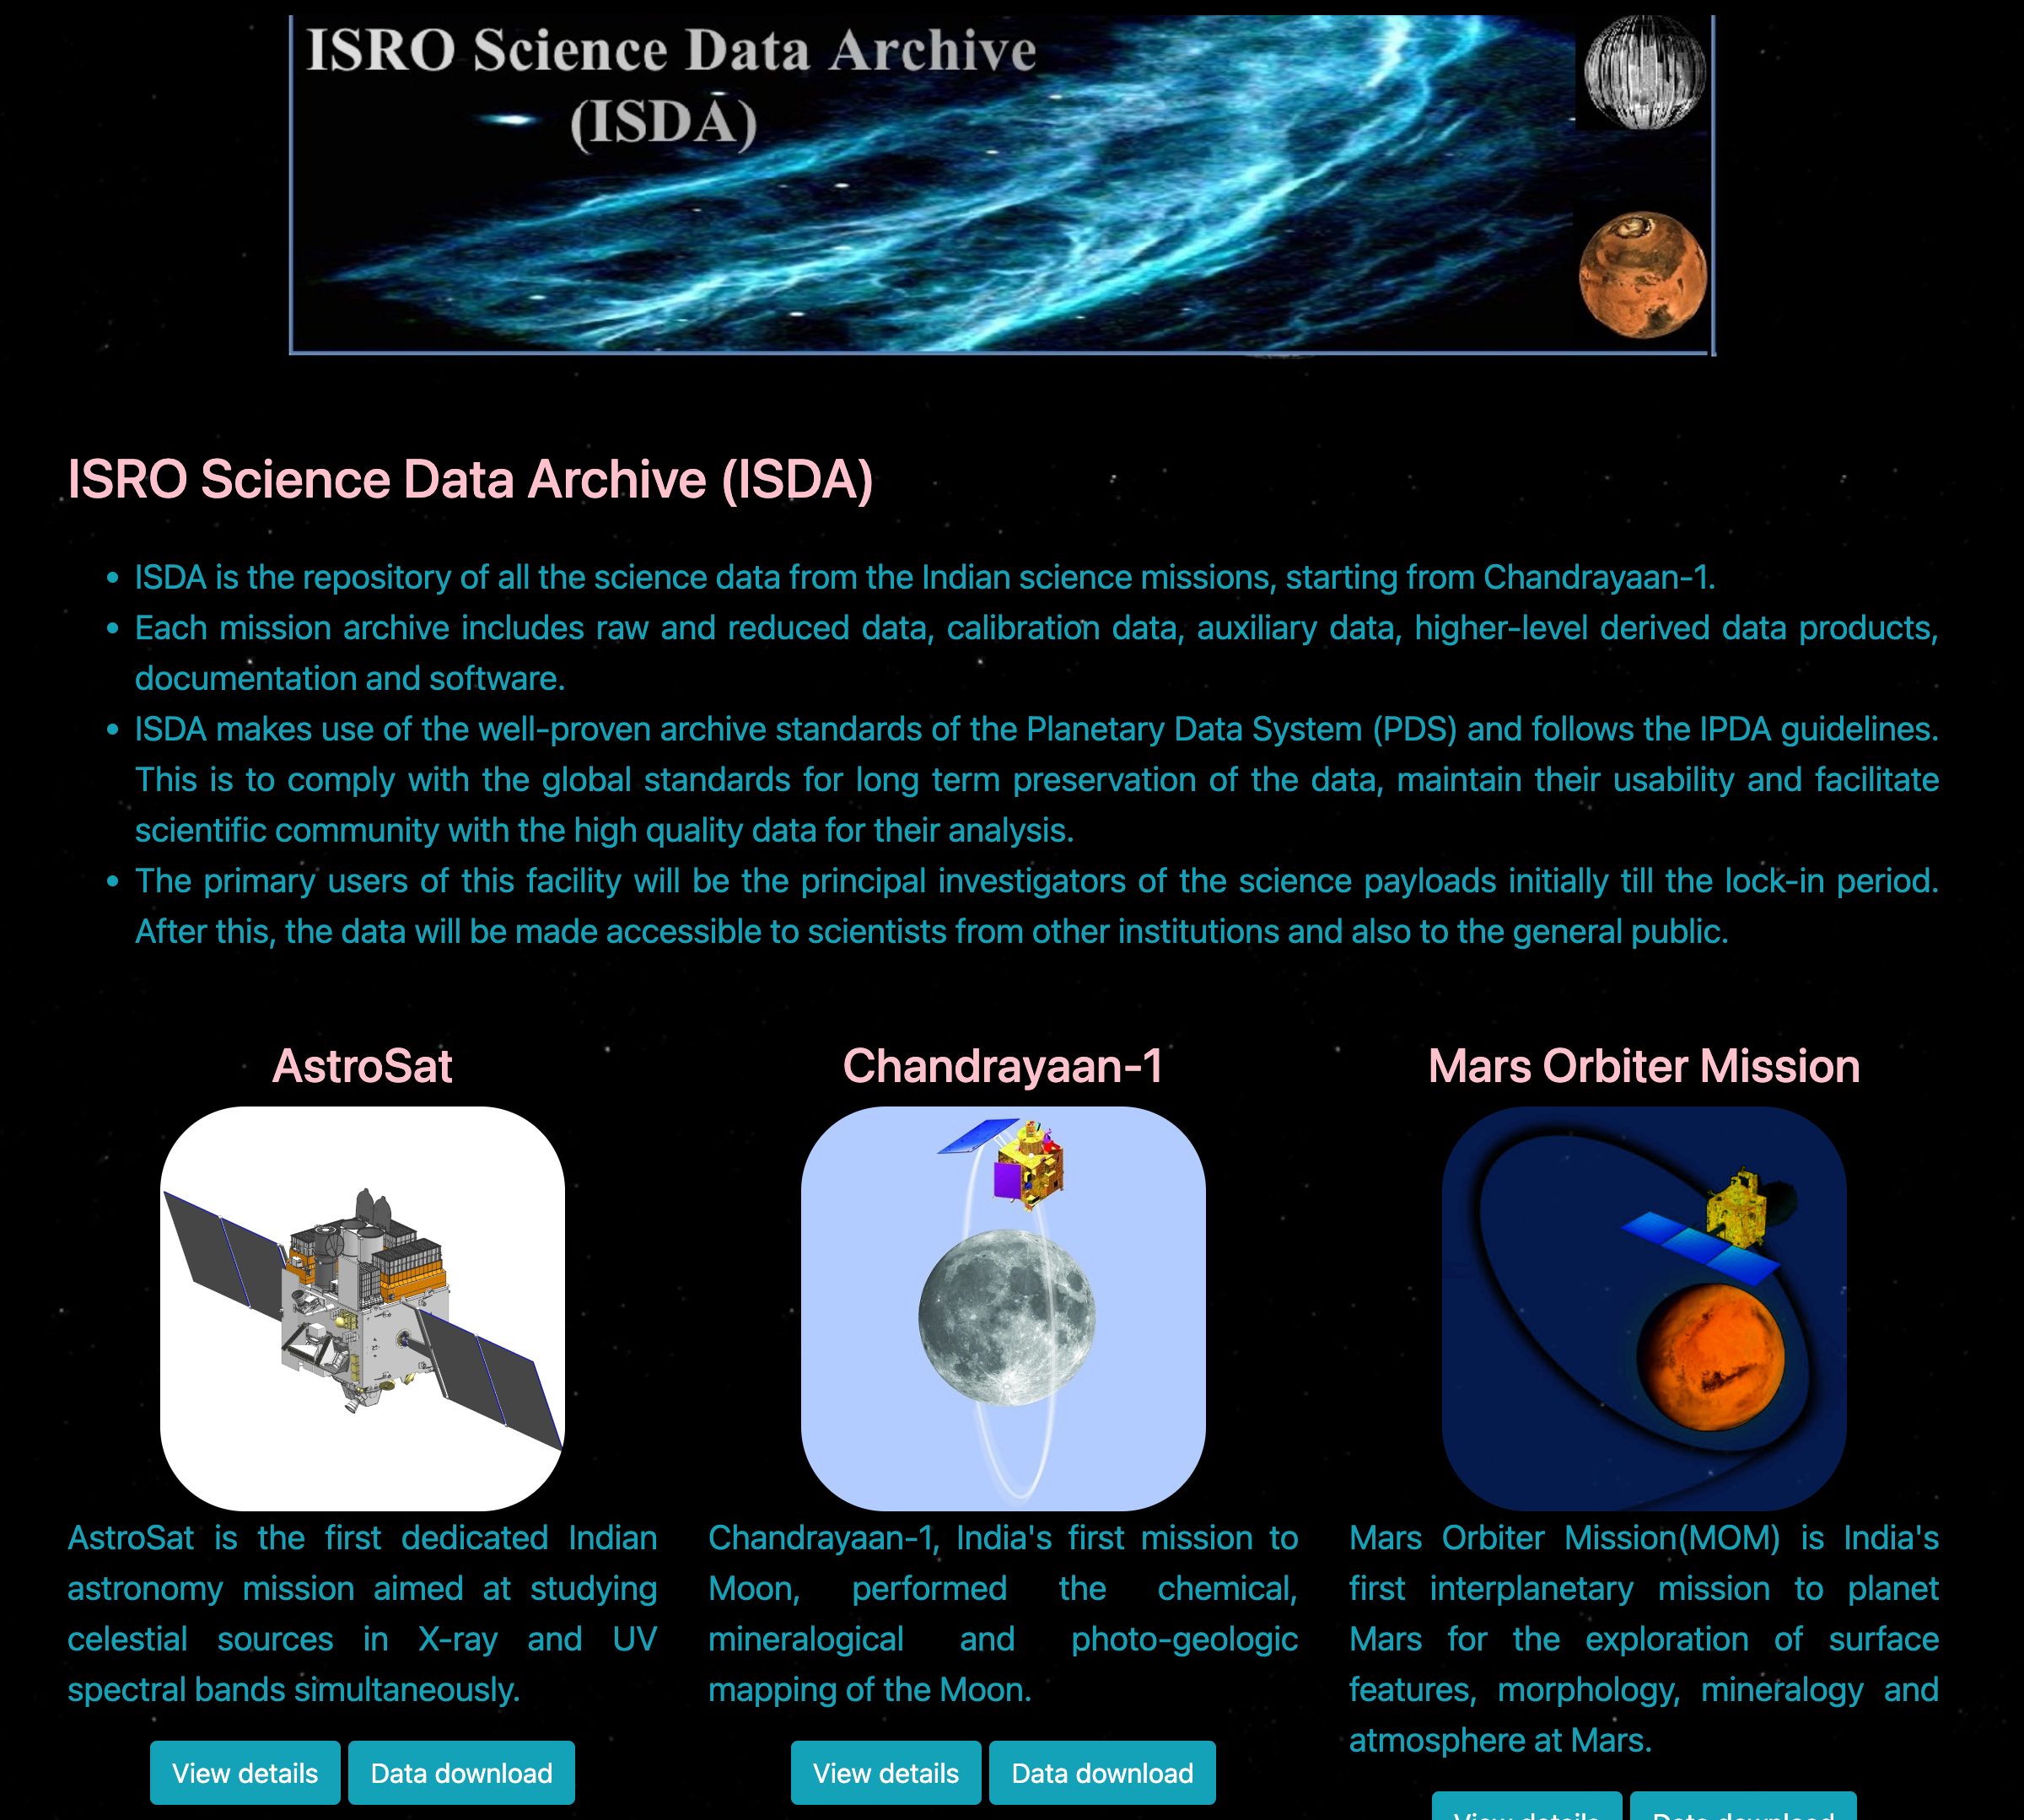 A Guide on ISRO’s Science Data Archive